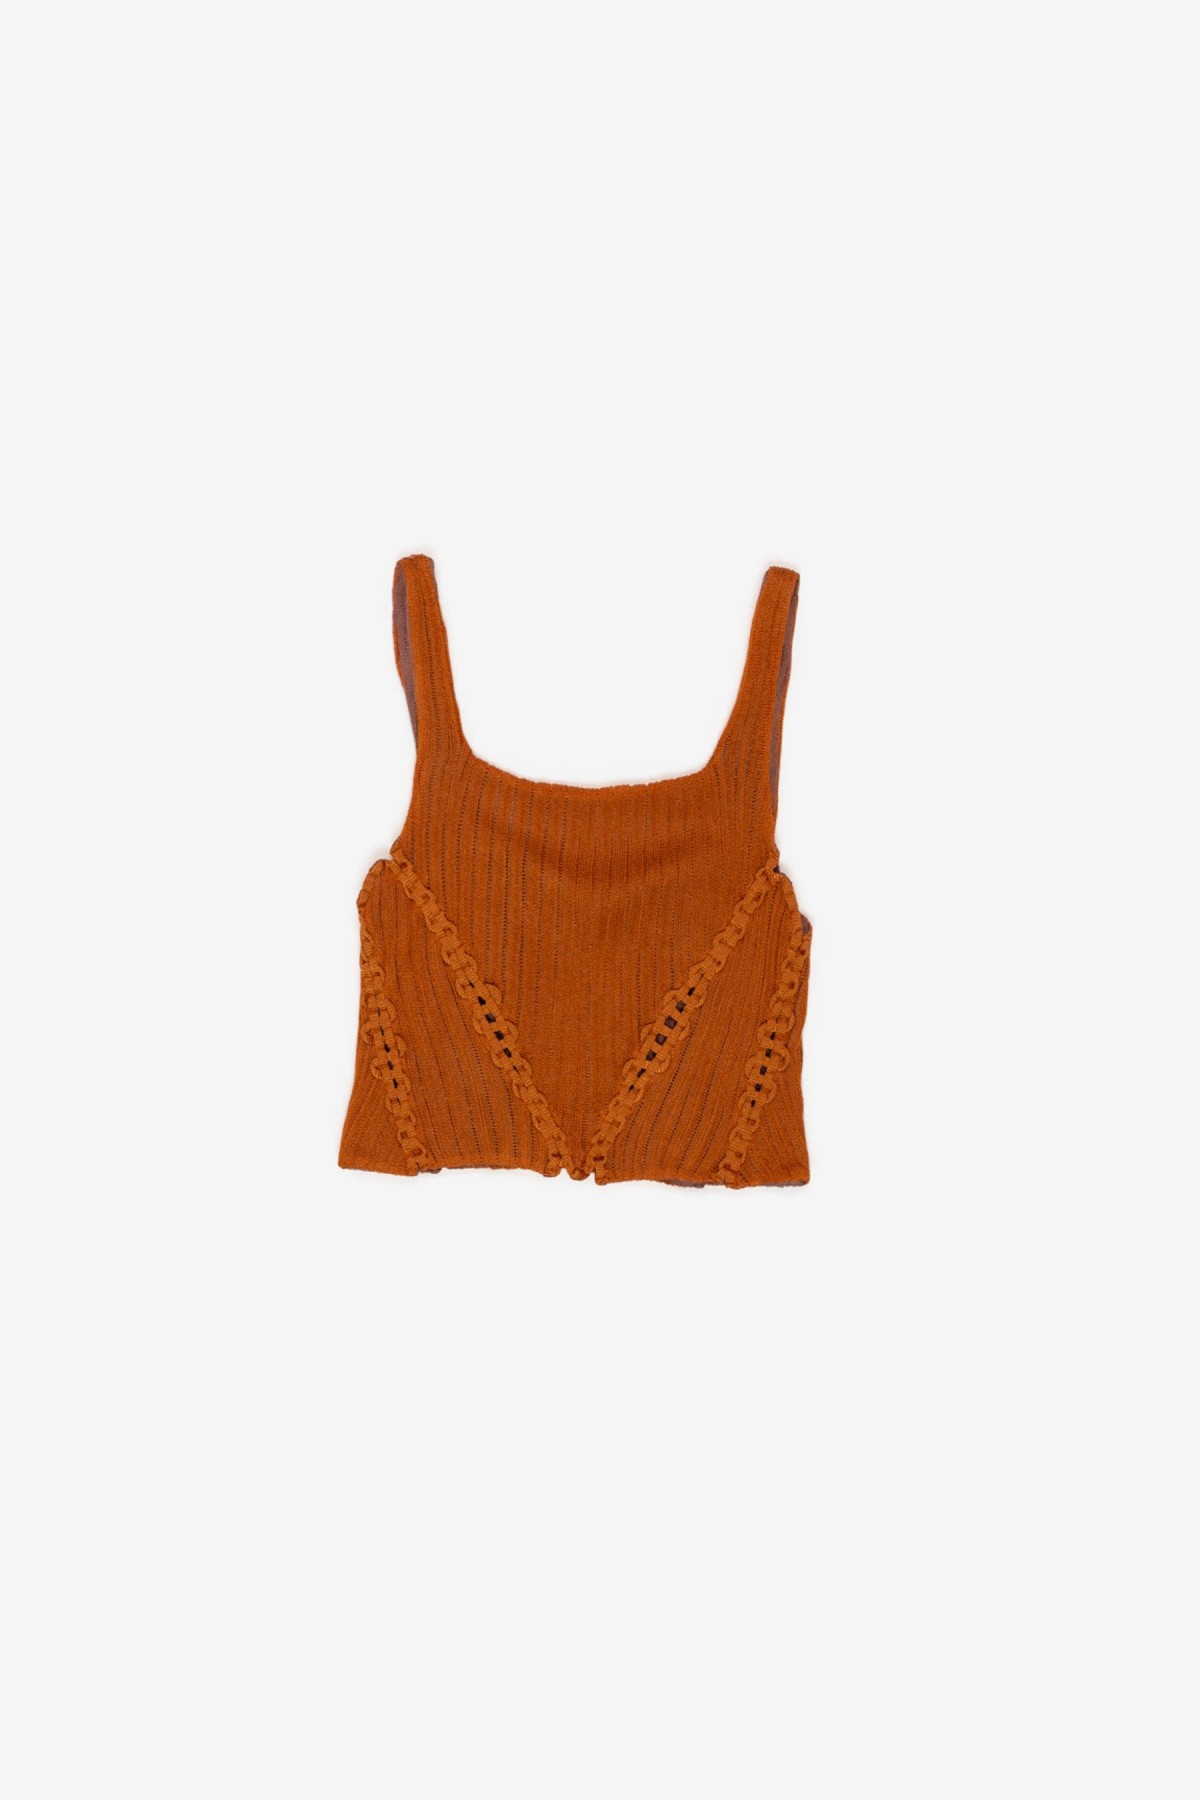 Isa Boulder Short Expandable Sleeveless Top in Coppersoil